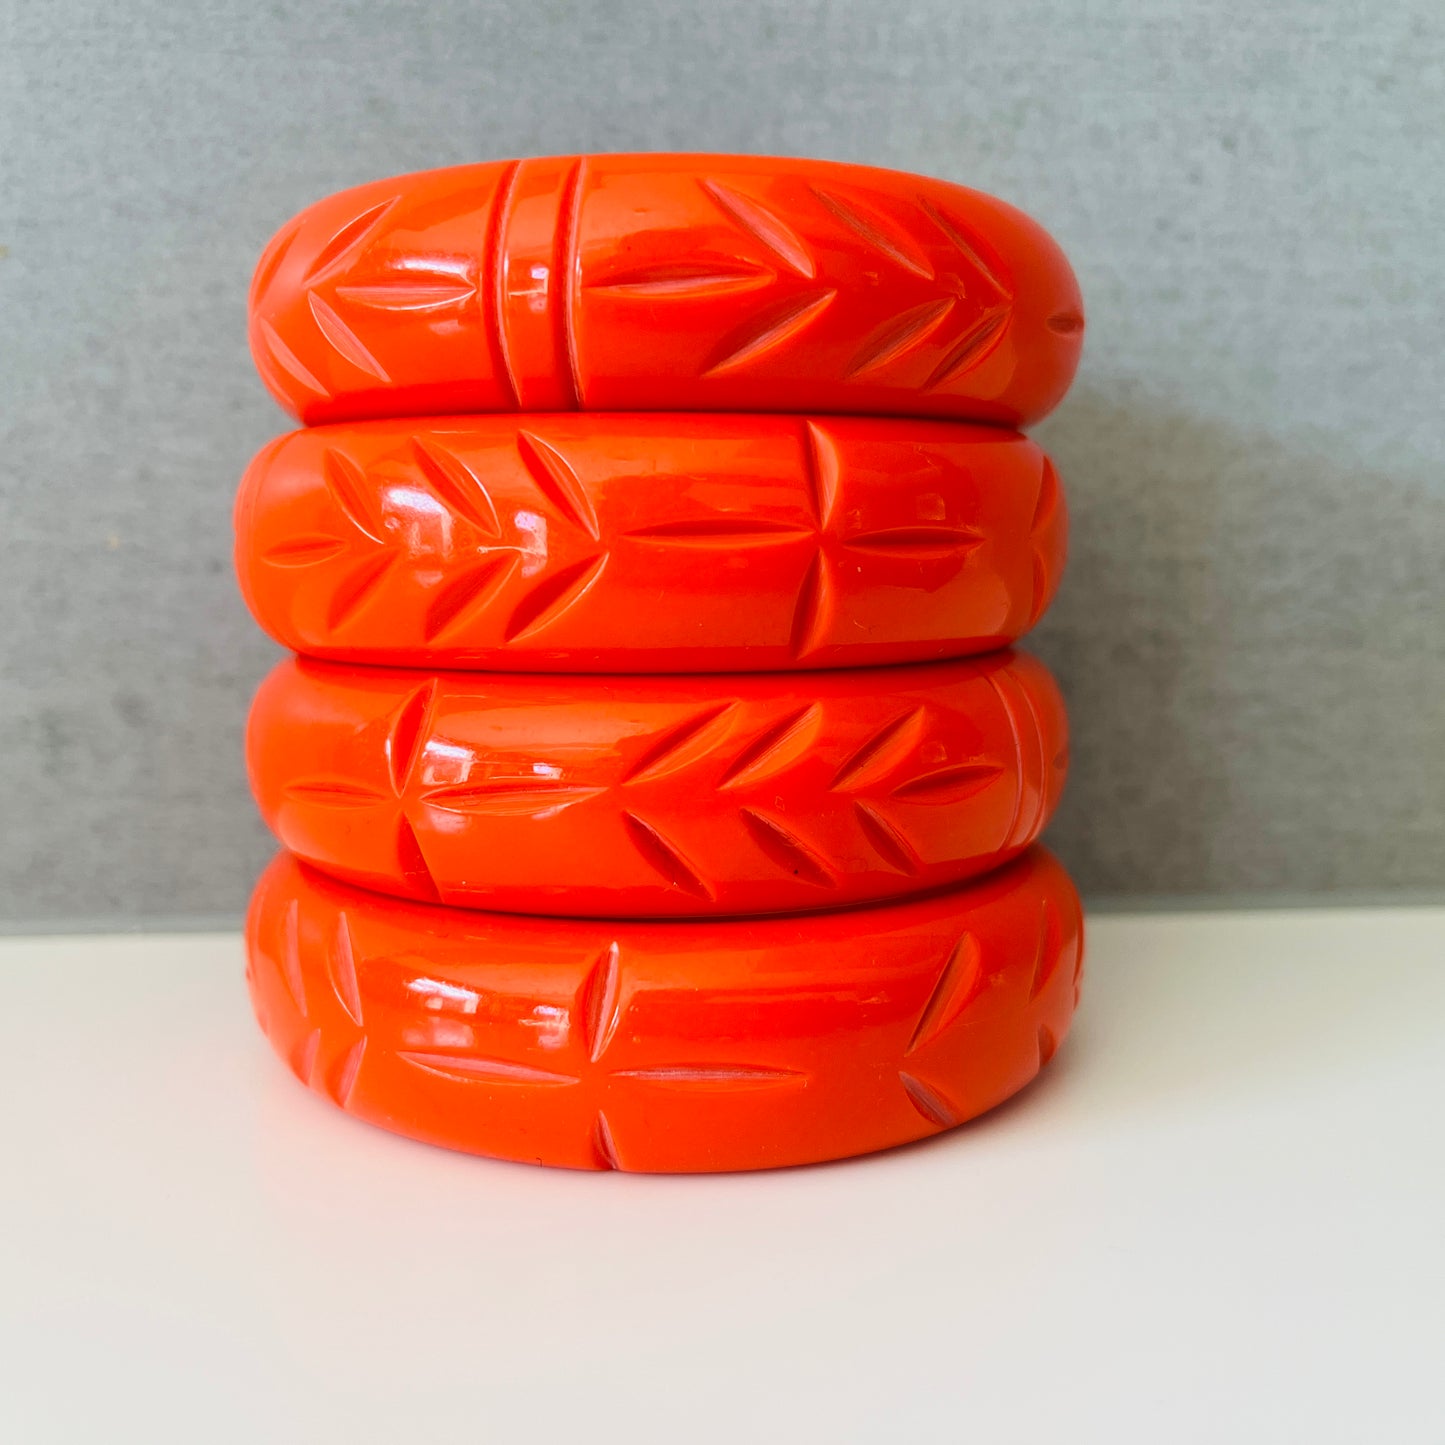 THE RESIN - ORANGE SCULPTED RING